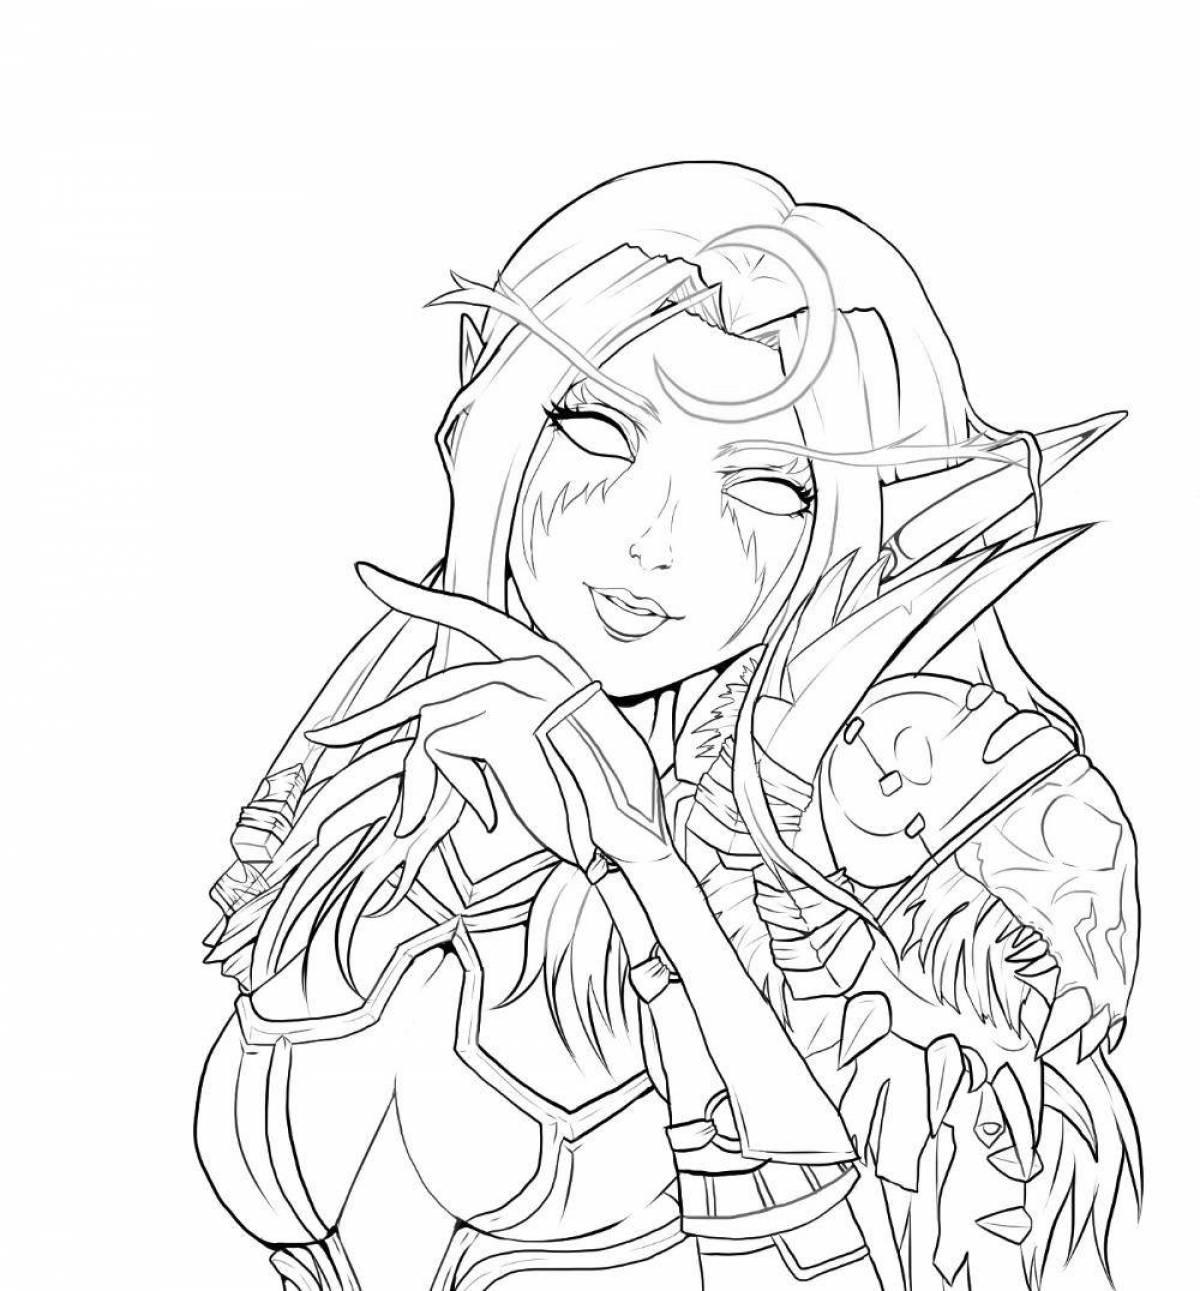 Great world of warcraft coloring book